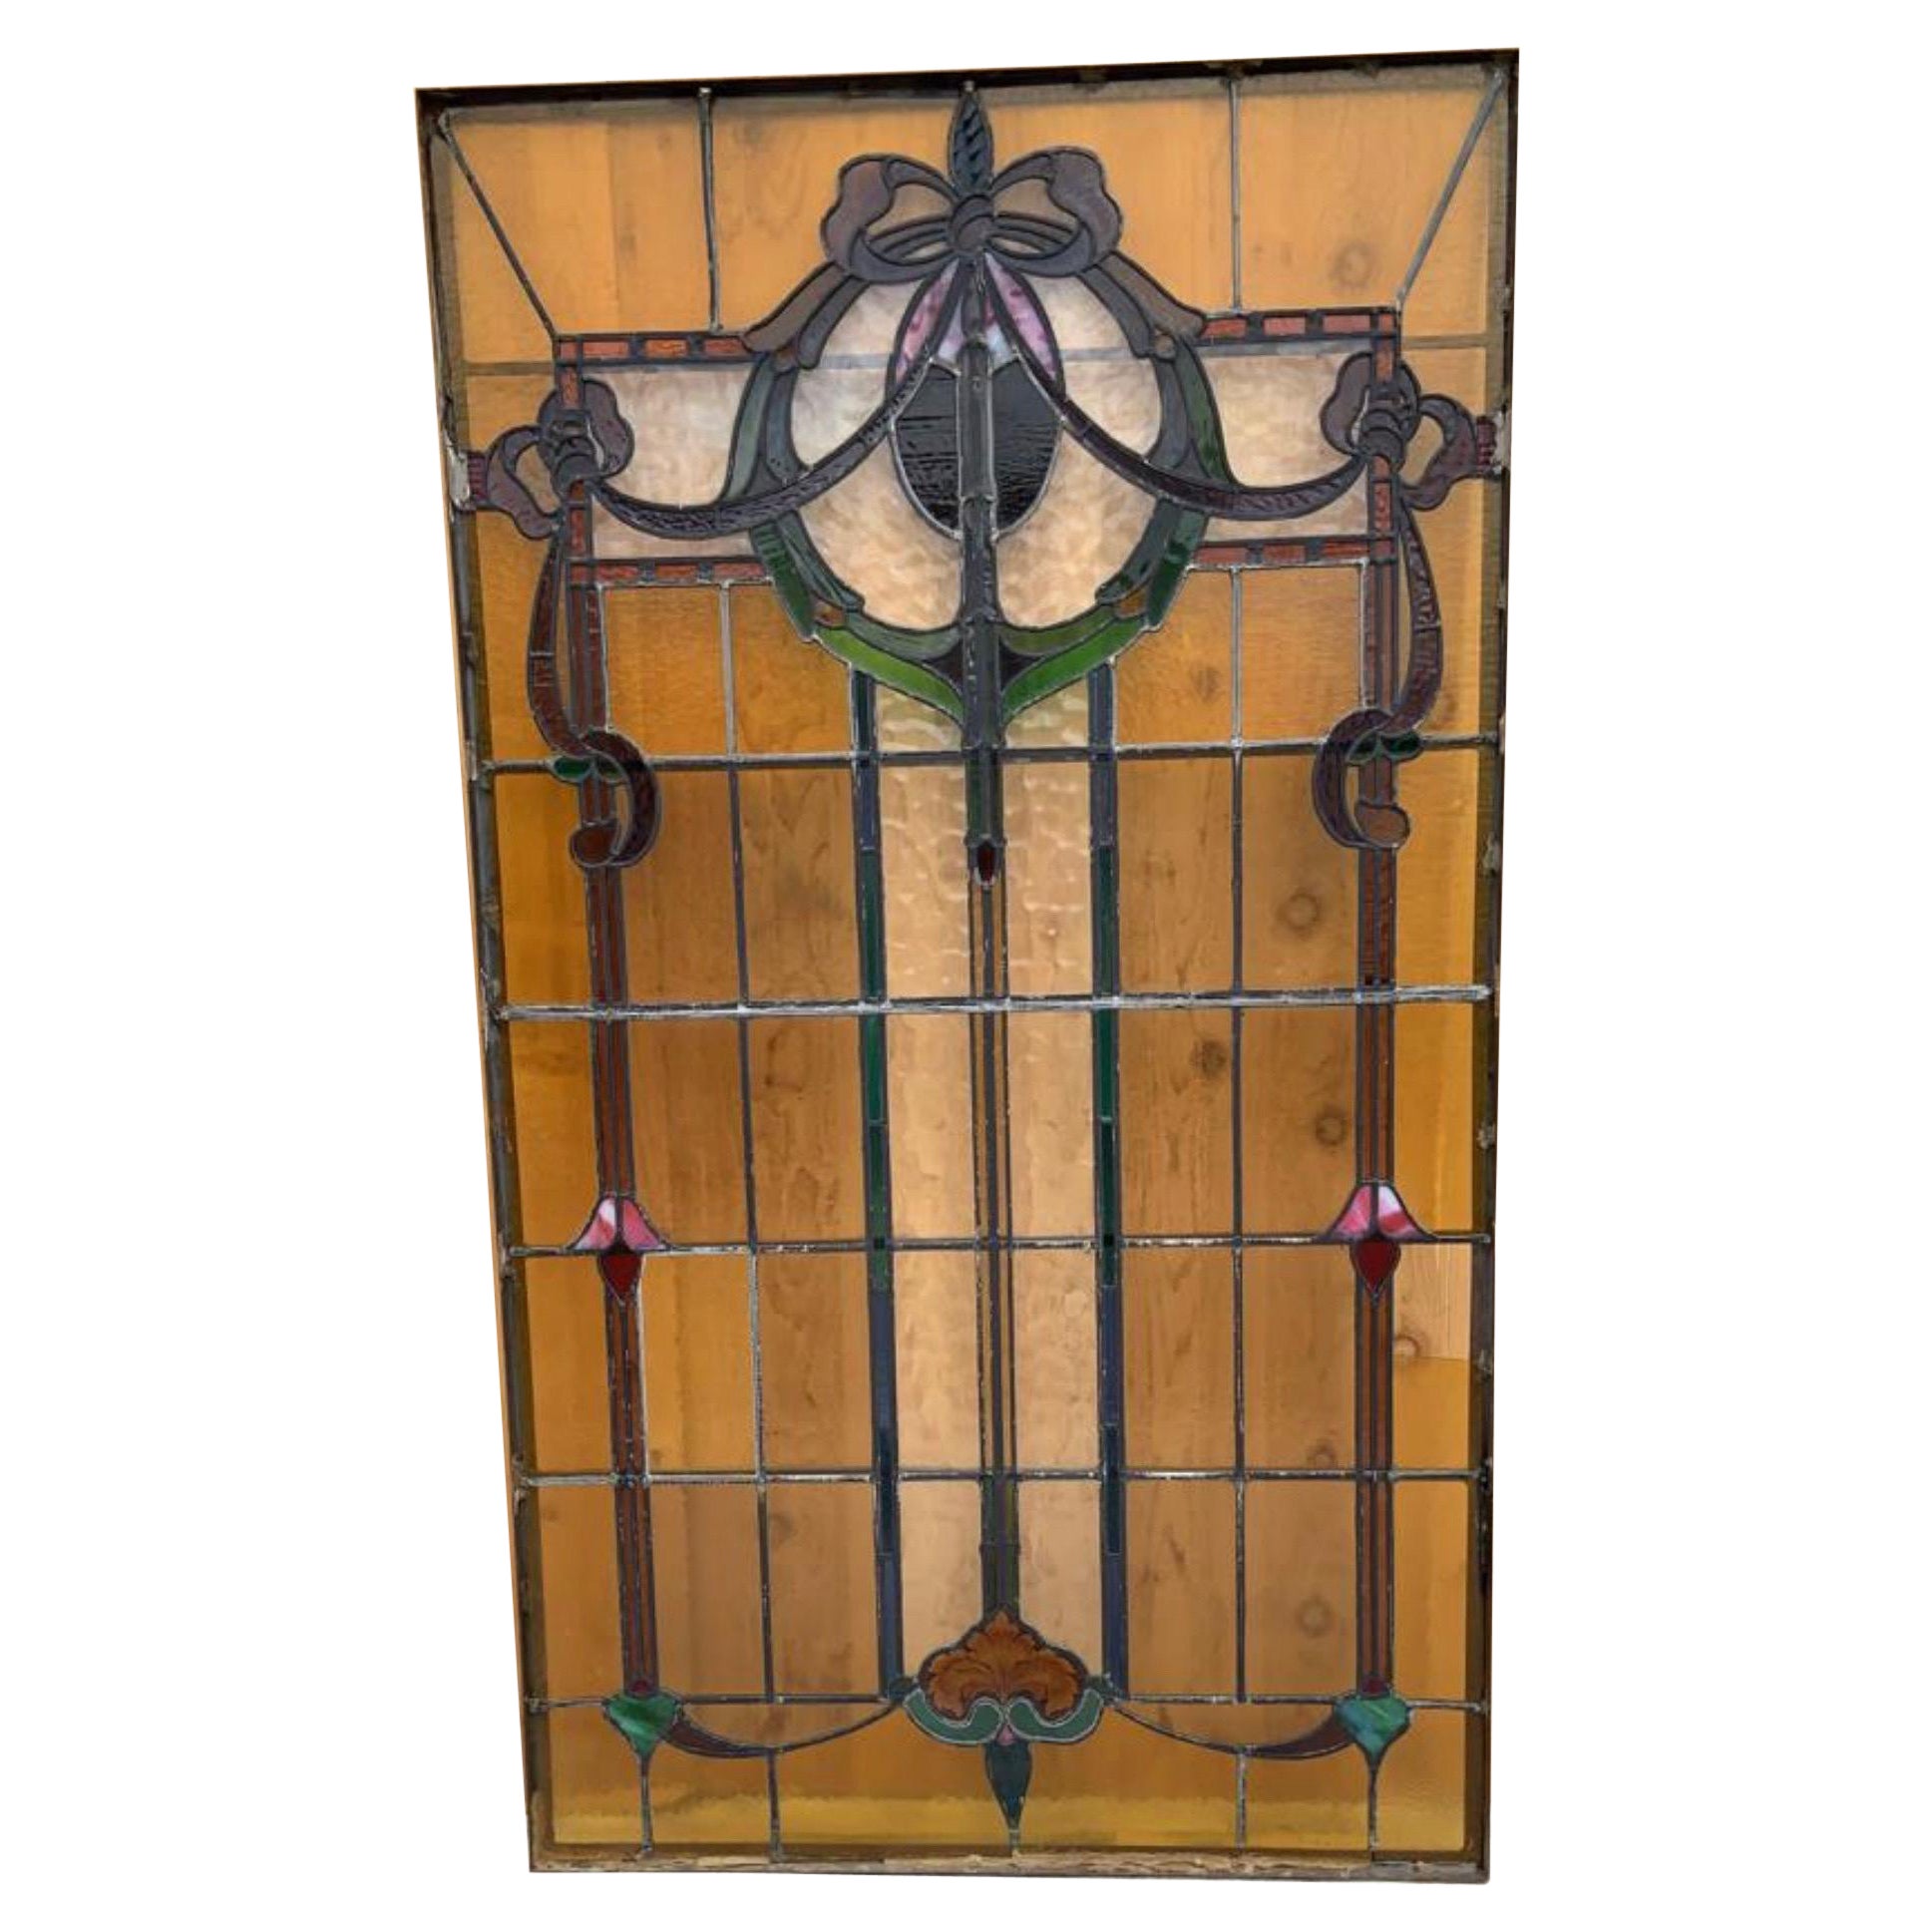 Antique Wrought Iron Framed Stained Glass Window / Door